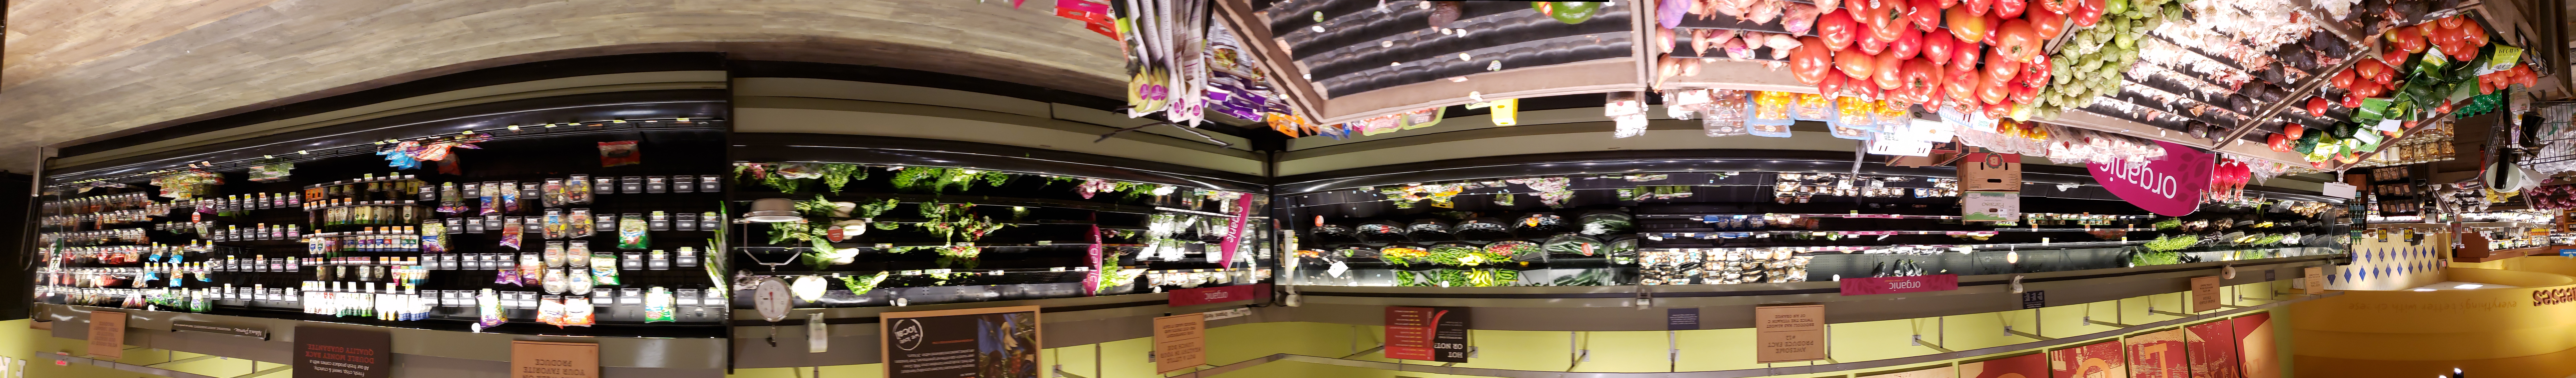 Hannaford produce on Friday, March 13th, 2020. Most items are gone.